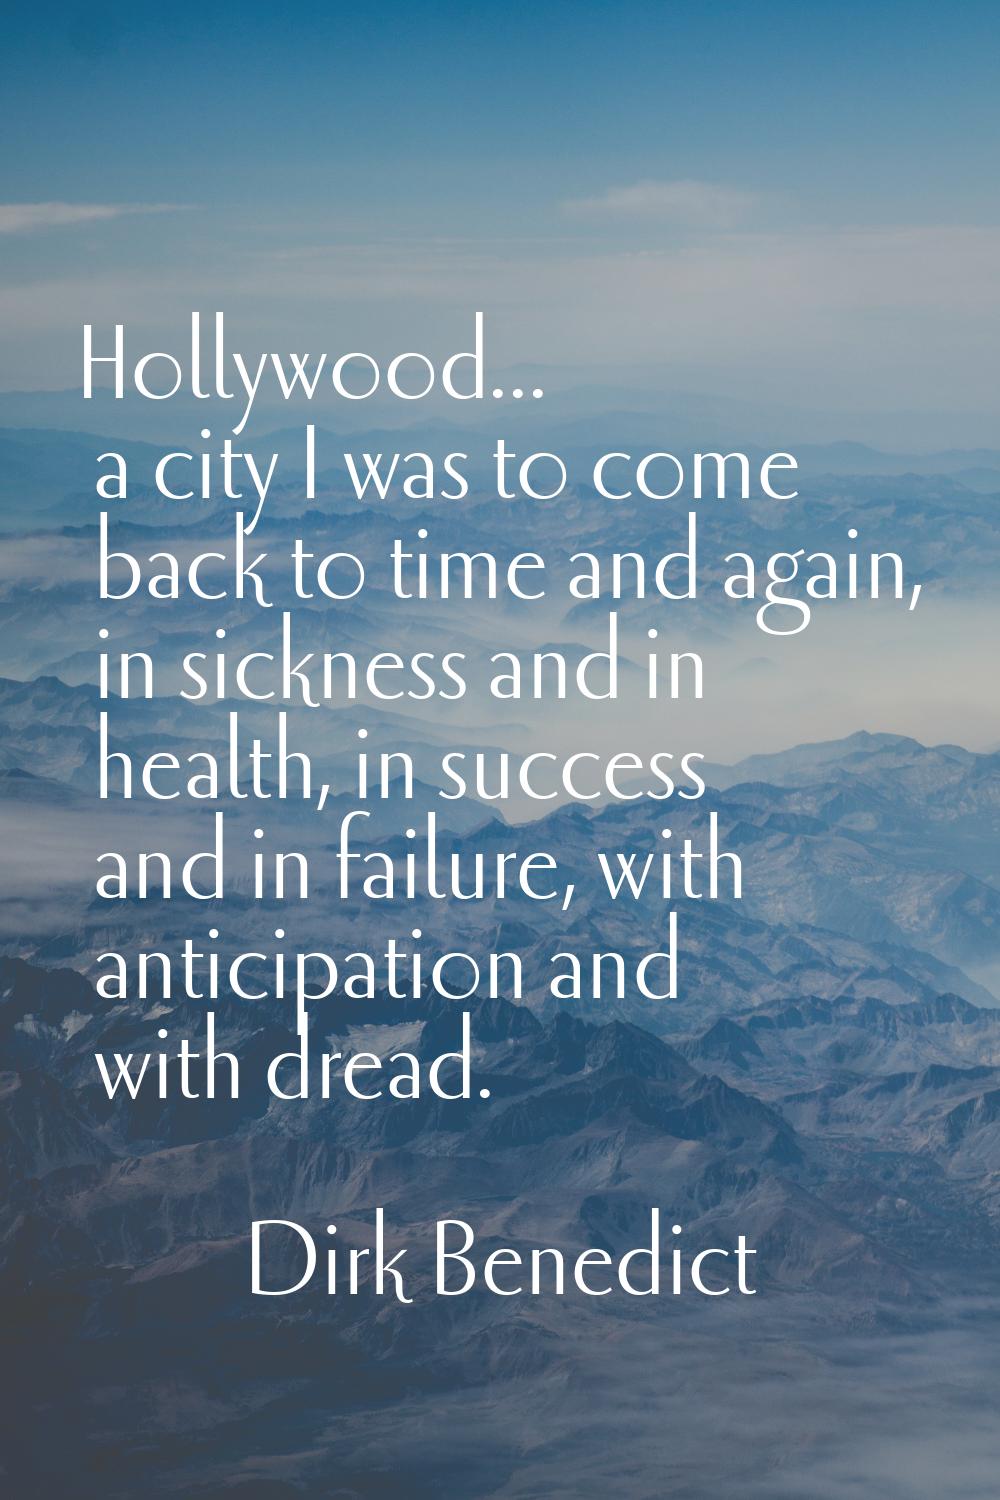 Hollywood... a city I was to come back to time and again, in sickness and in health, in success and